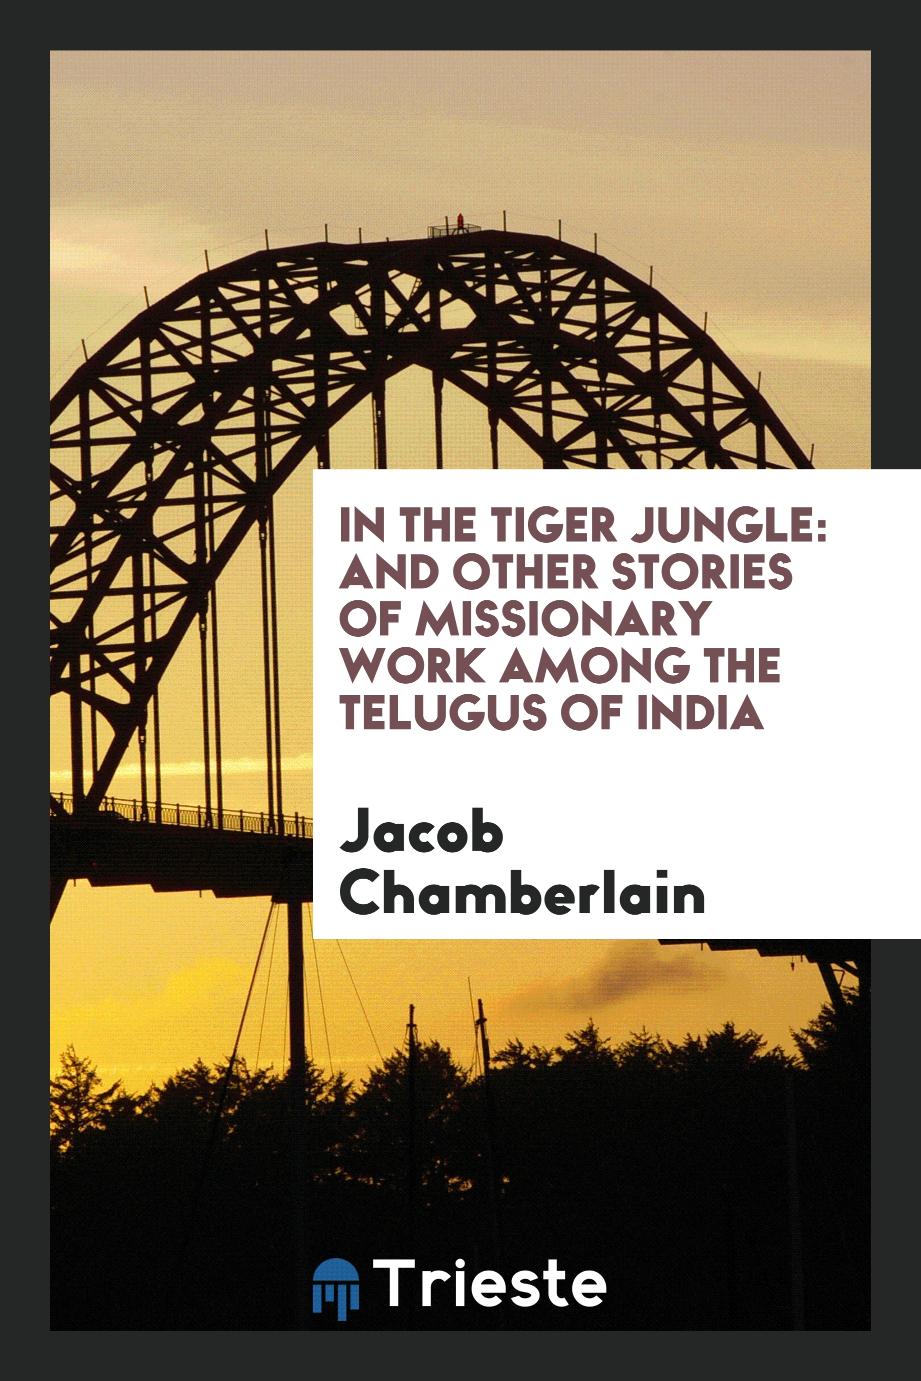 In the tiger jungle: and other stories of missionary work among the Telugus of India